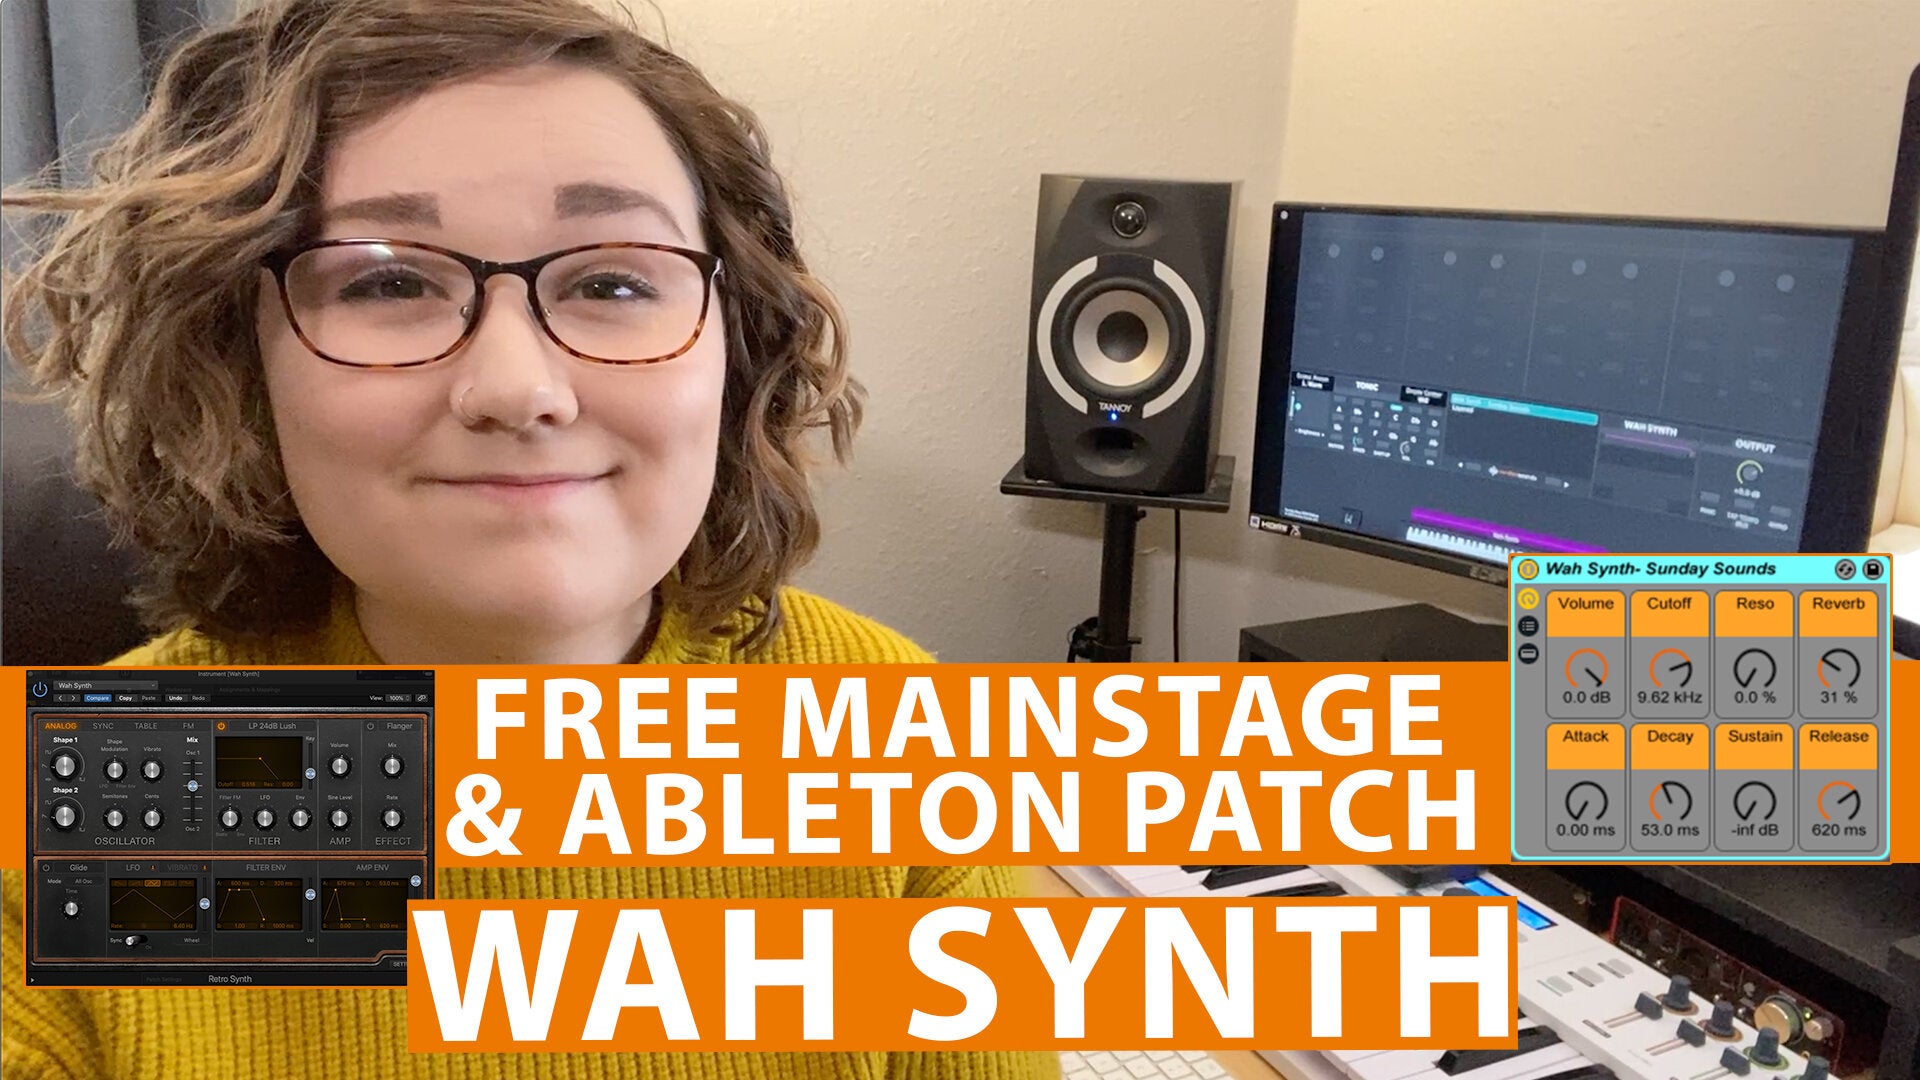 Free MainStage & Ableton Worship Patch! - Wah Synth